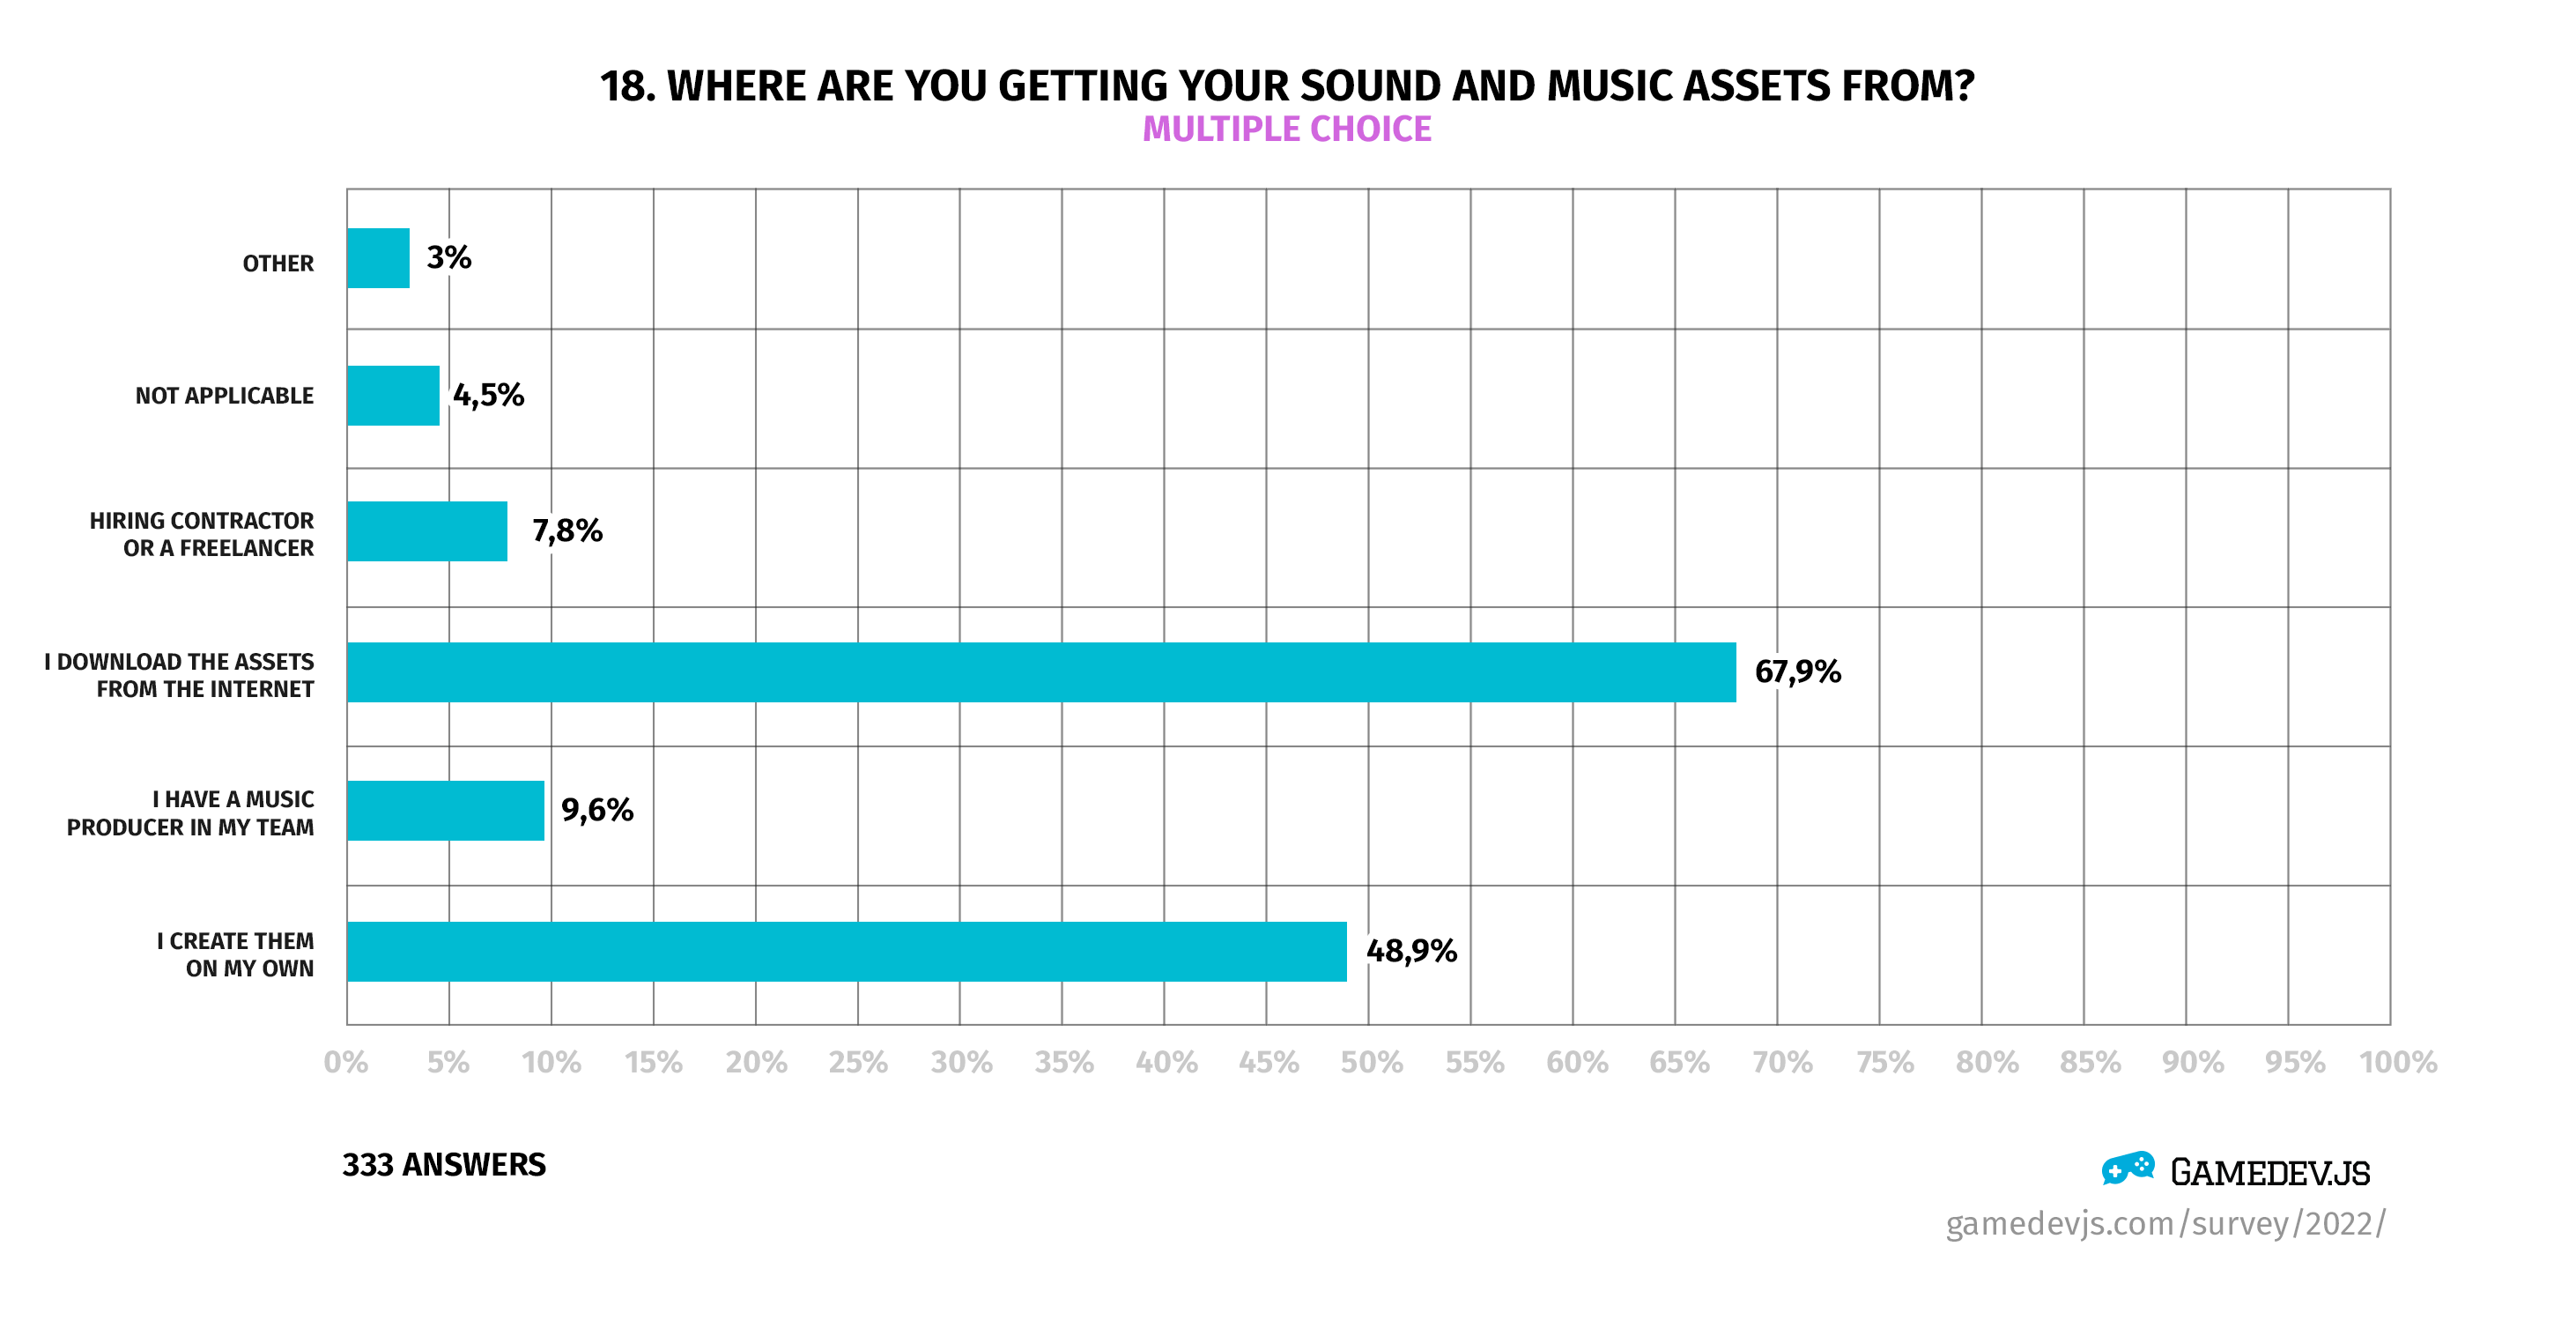 Gamedev.js Survey 2022 - Question #18: Where are you getting your sound and music assets from?